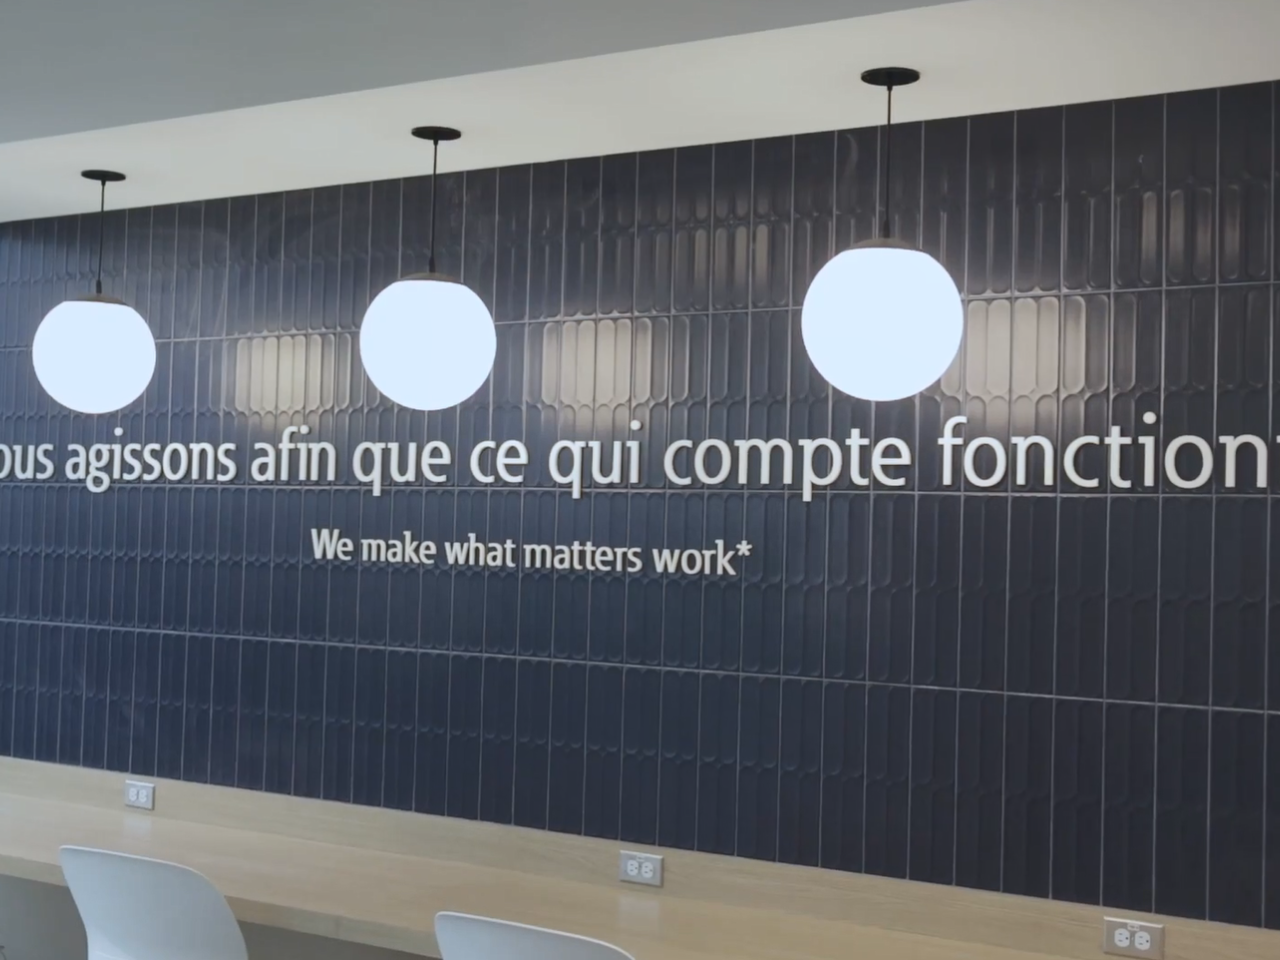 Slogan on a wall in an office setting.